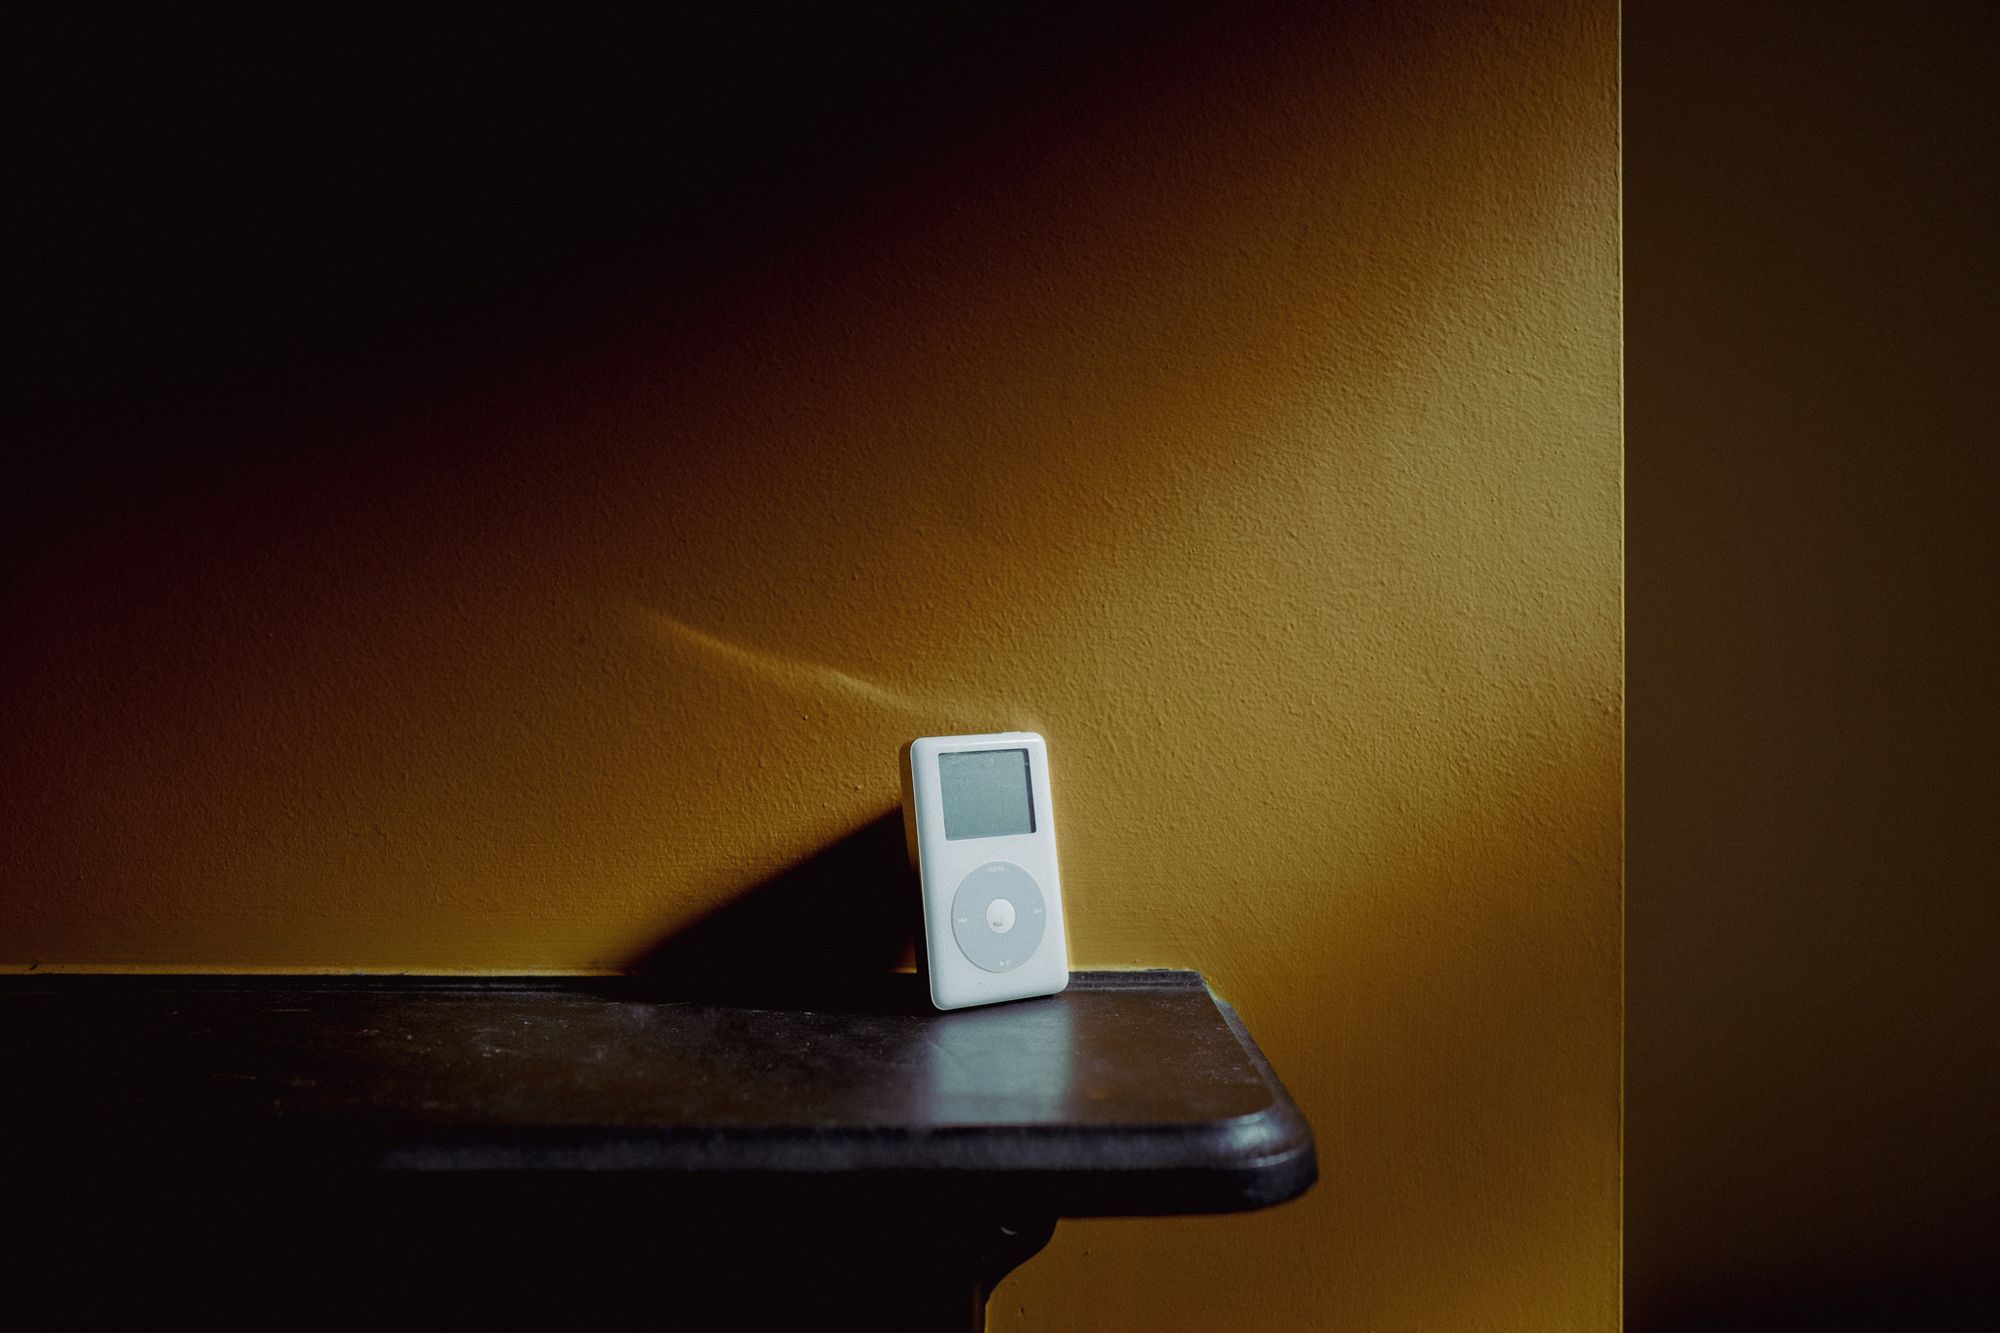 4th generation iPod with click wheel against a yellow wall